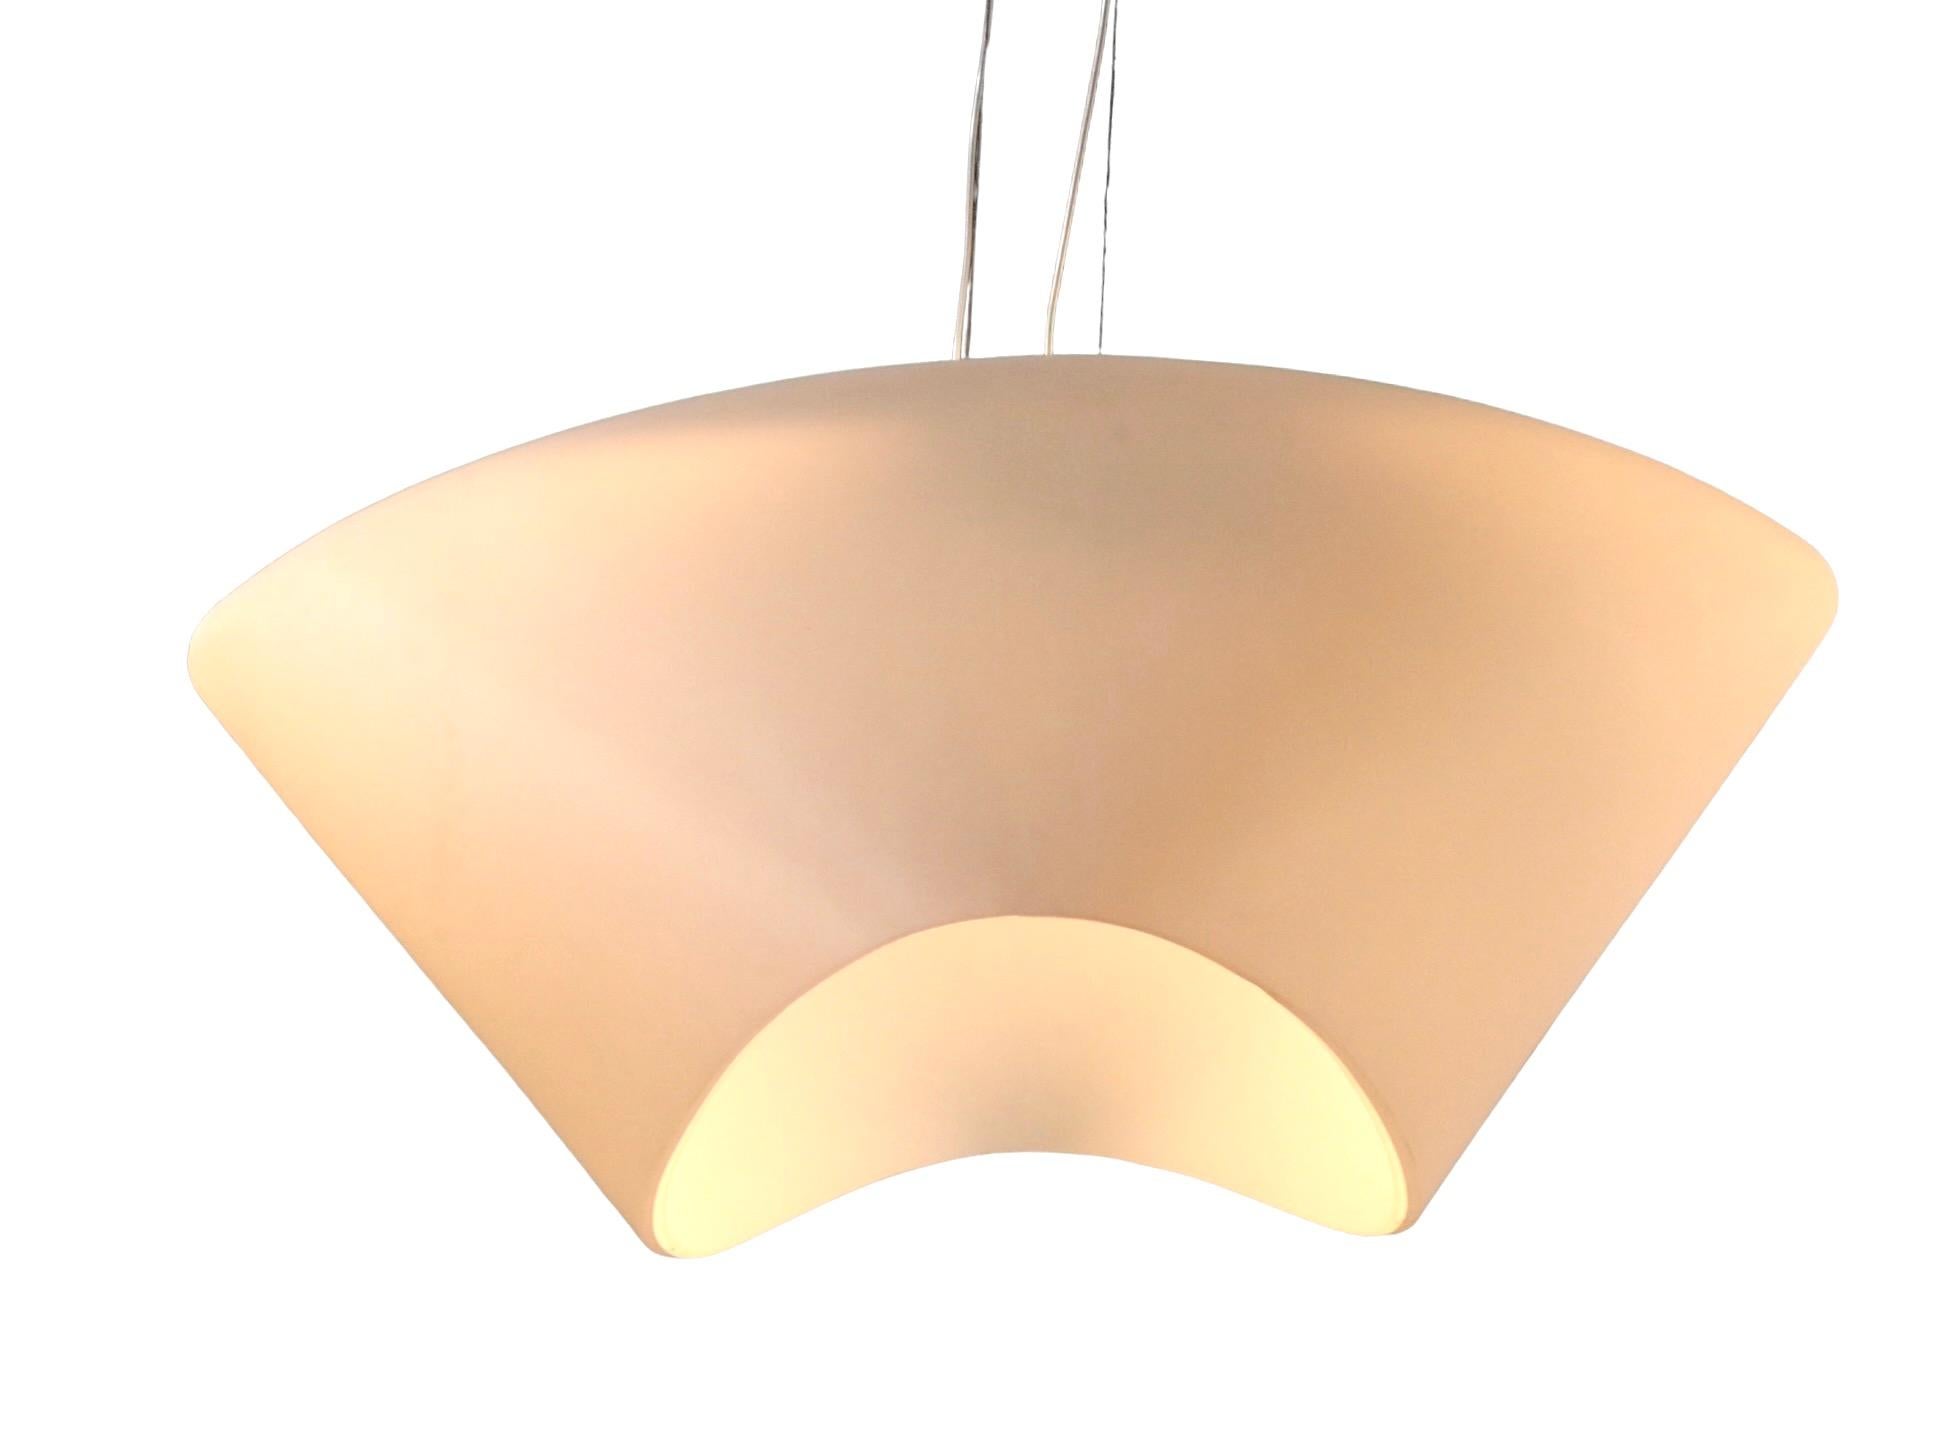 Asymmetrical Satin Glass Post Modern Light Fixture Made in Italy by Foscarini For Sale 2